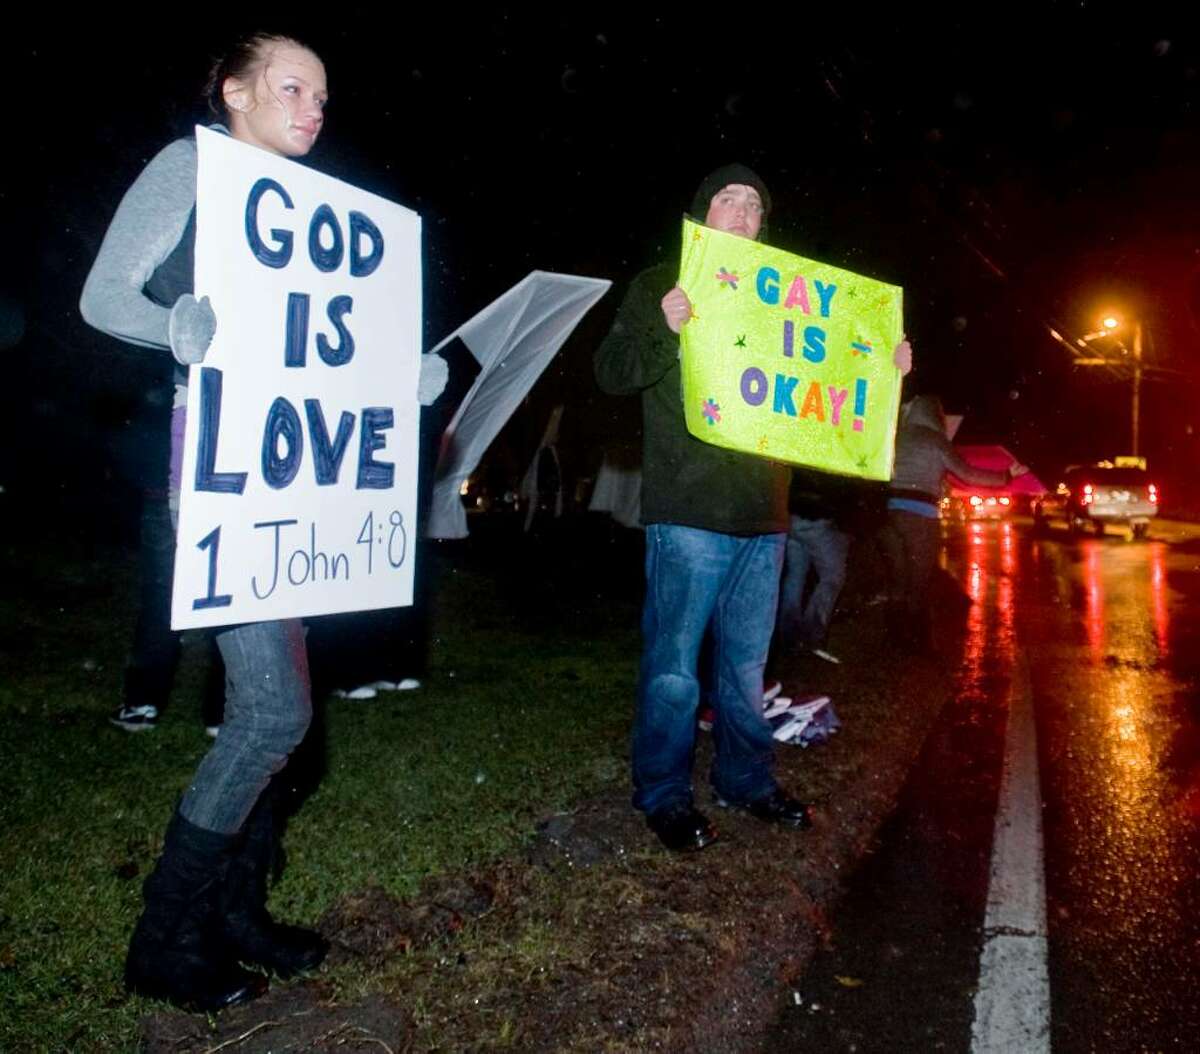 21 year old Kaliana Rocca of Bethel and Harold Madden, a student at Mitchell College in Rhode Island, held signs in front of the Brookfield Theater despite heavy rain and high winds, responding to protestering Members of the Westboro Baptist Church of Topeka, Kan., which planned to picket outside the theater during its last performance of “The Laramie Project”. The play is based on the murder of Matthew Shepard, a 21-year-old gay college student who was kidnapped, beaten and left to die in Laramie, Wyo., in 1998. Saturday, Mar. 13, 2010